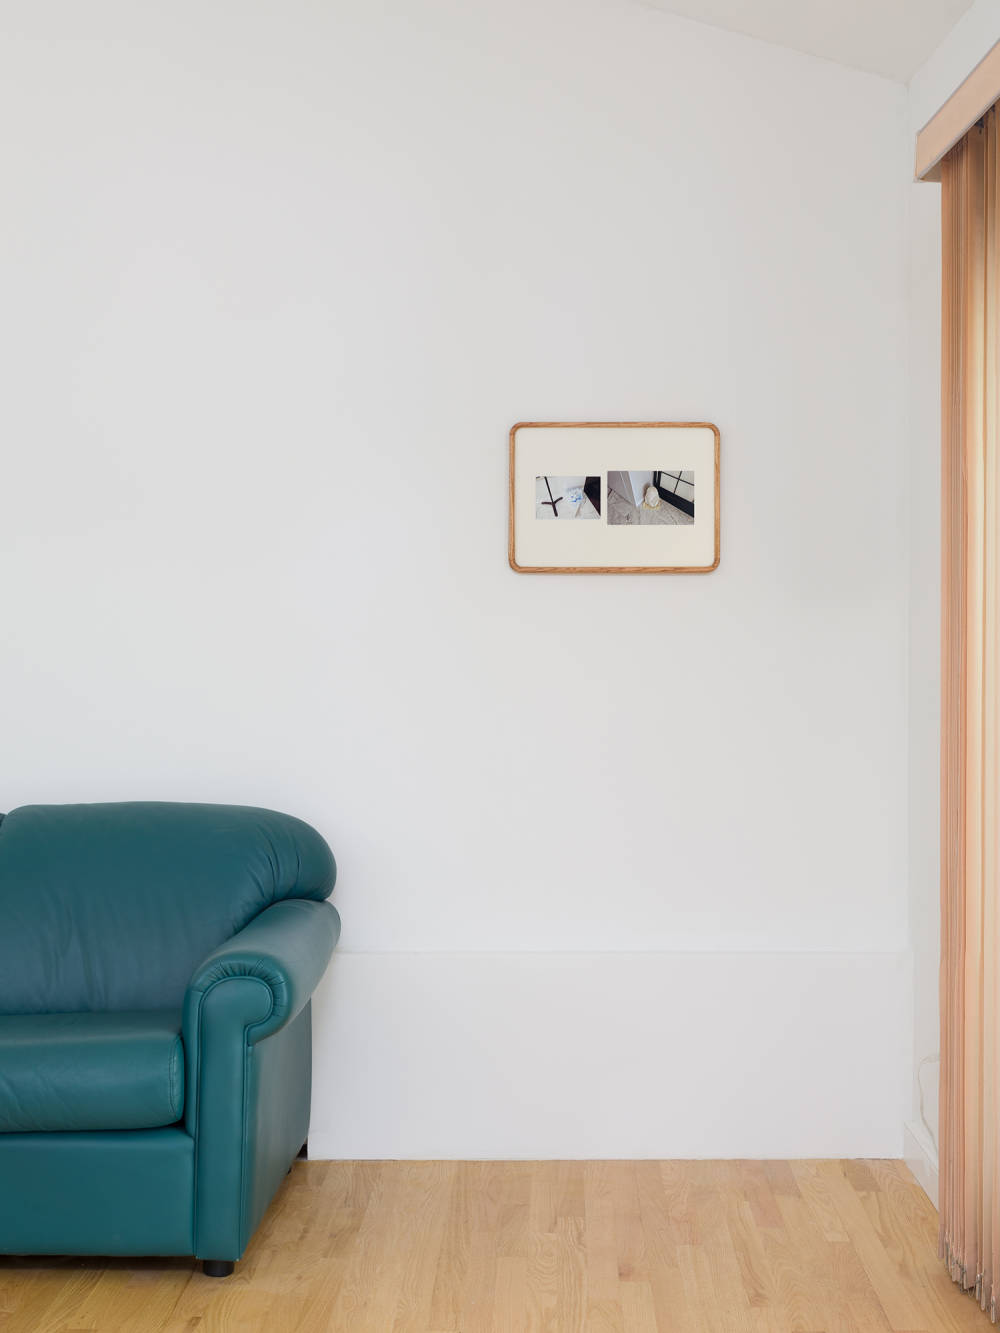 A small wooden frame next to a blue leather couch. 